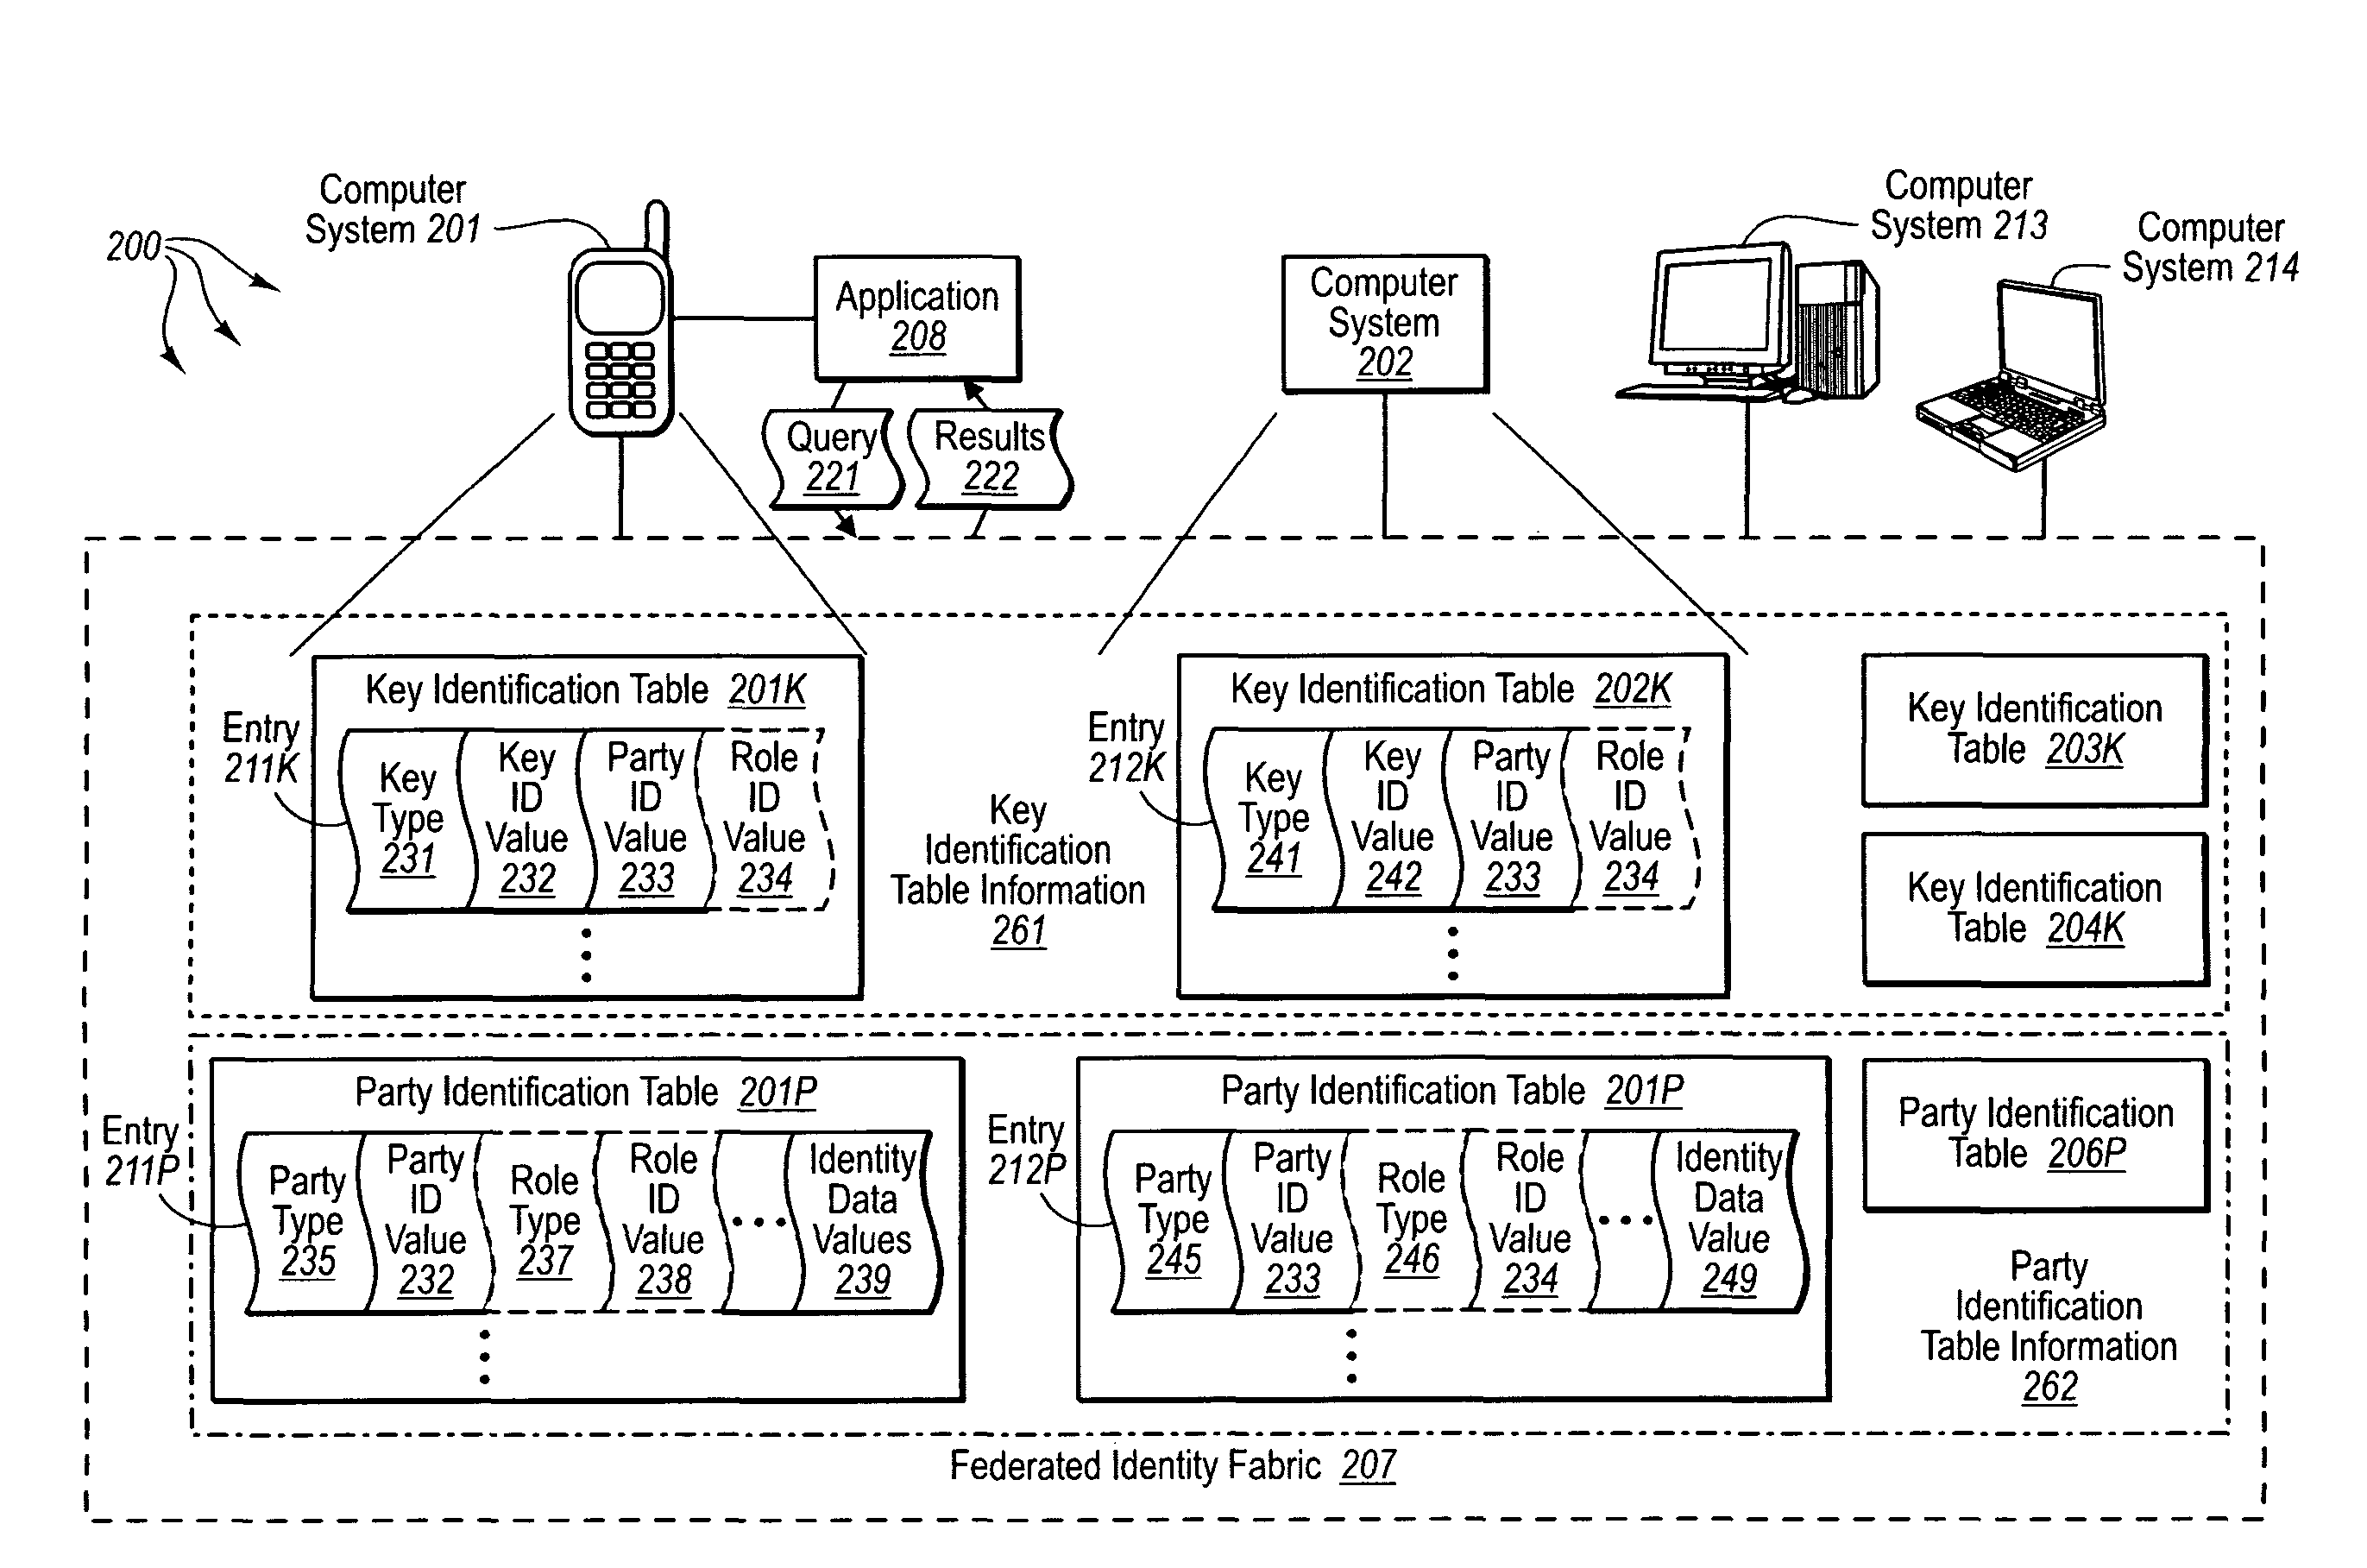 Modeling party identities in computer storage systems